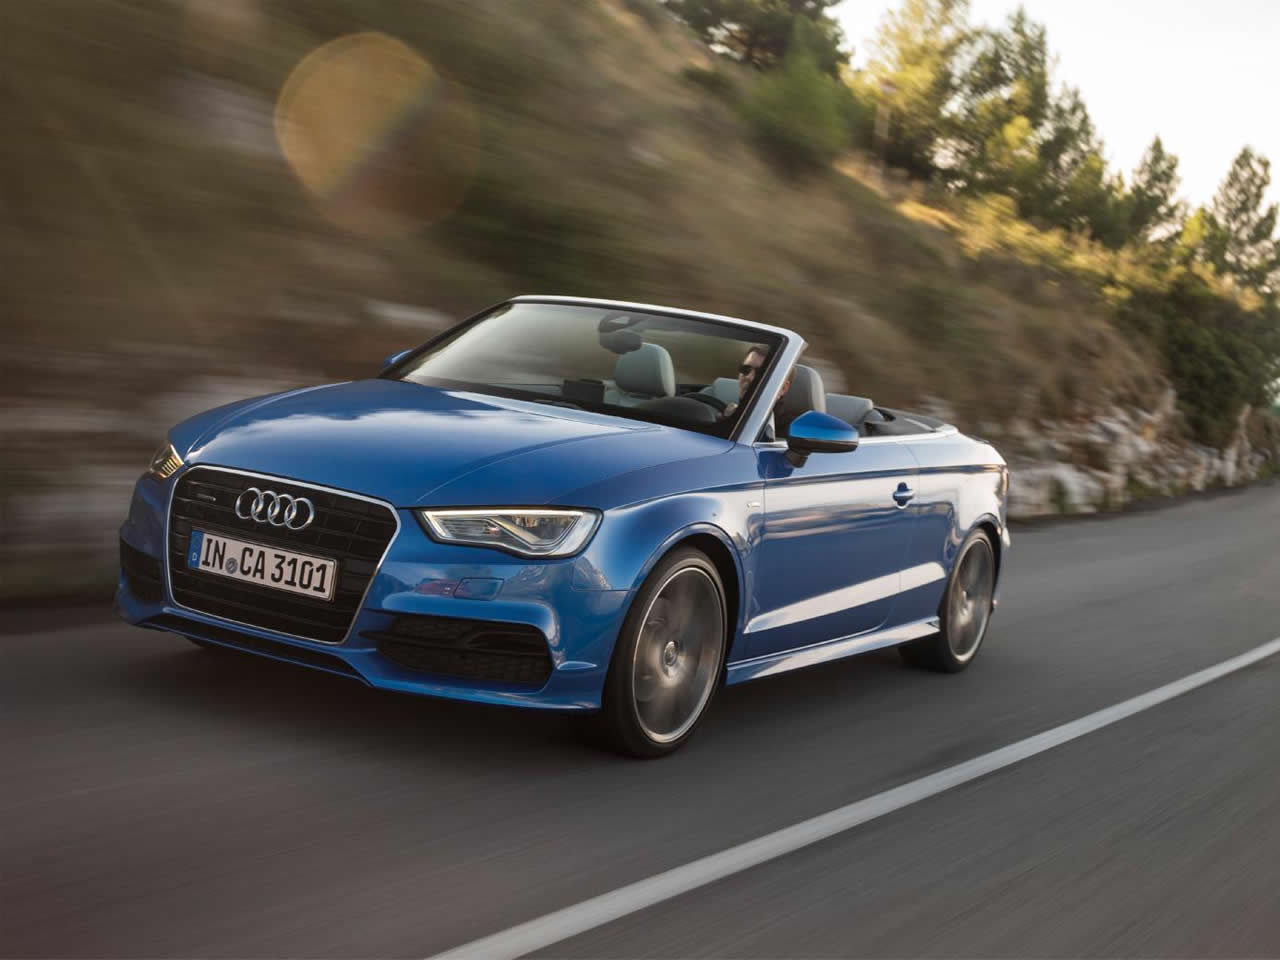 Audi A3 Cabriolet Buying Guide